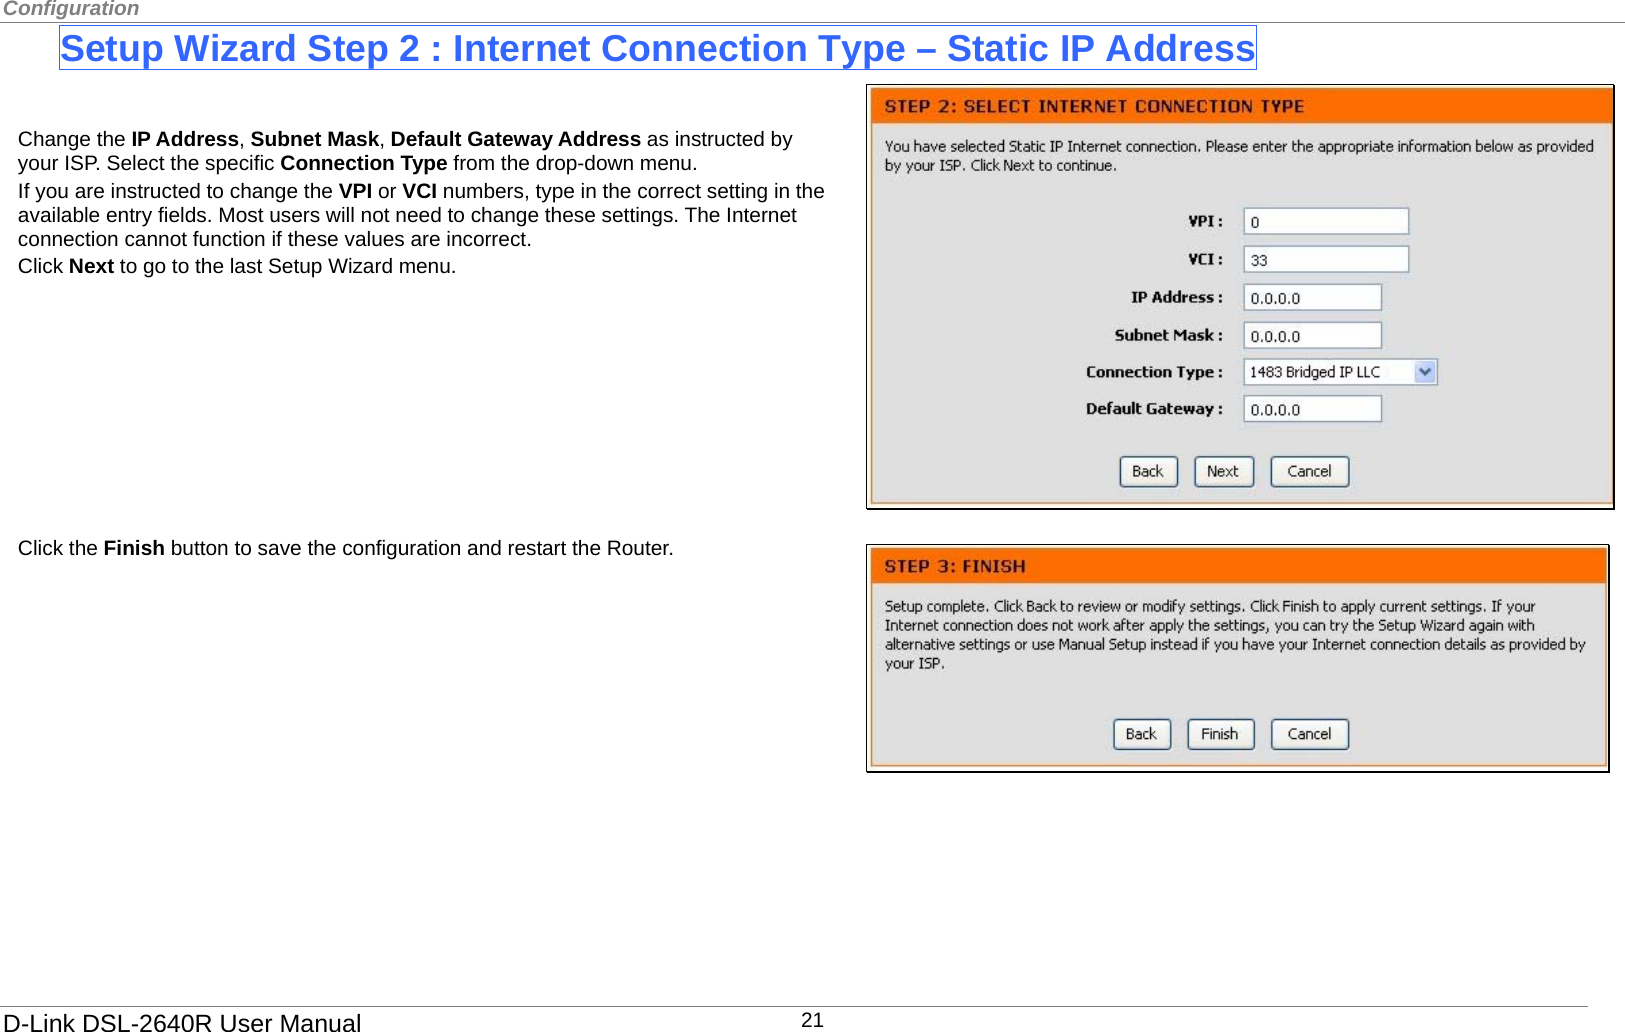 Configuration  Setup Wizard Step 2 : Internet Connection Type – Static IP Address    Click the Finish button to save the configuration and restart the Router. Change the IP Address, Subnet Mask, Default Gateway Address as instructed by your ISP. Select the specific Connection Type from the drop-down menu.   If you are instructed to change the VPI or VCI numbers, type in the correct setting in the available entry fields. Most users will not need to change these settings. The Internet connection cannot function if these values are incorrect. Click Next to go to the last Setup Wizard menu.               D-Link DSL-2640R User Manual 21